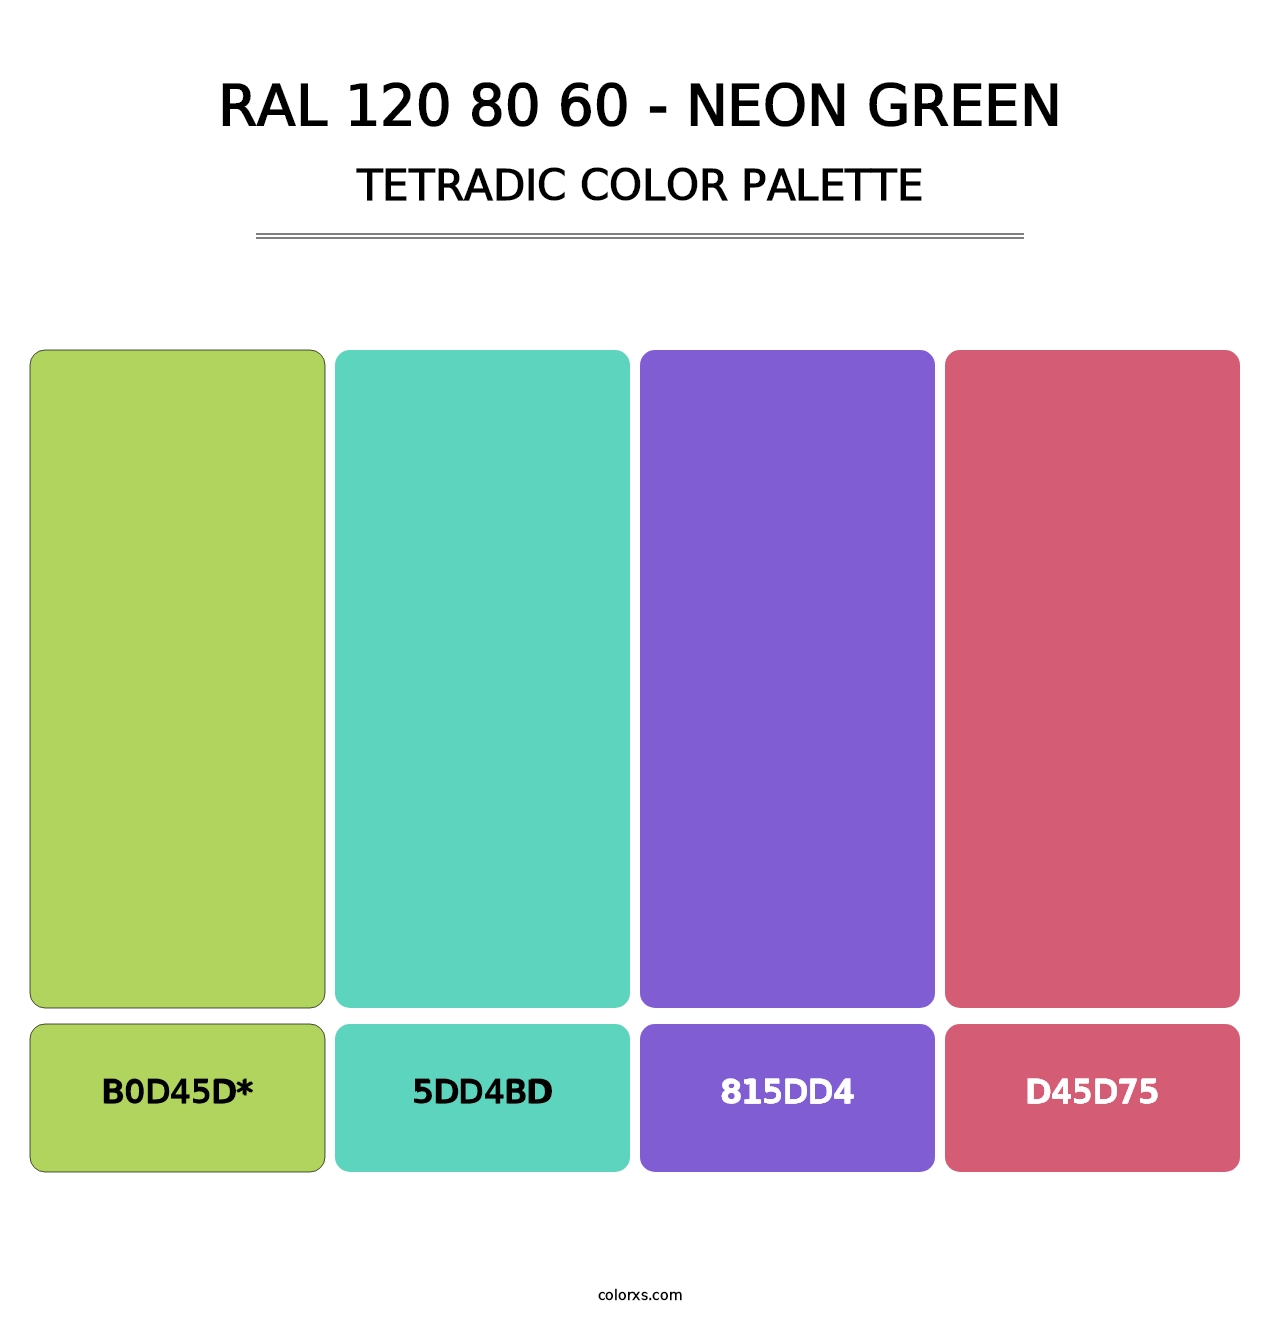 RAL 120 80 60 - Neon Green - Tetradic Color Palette